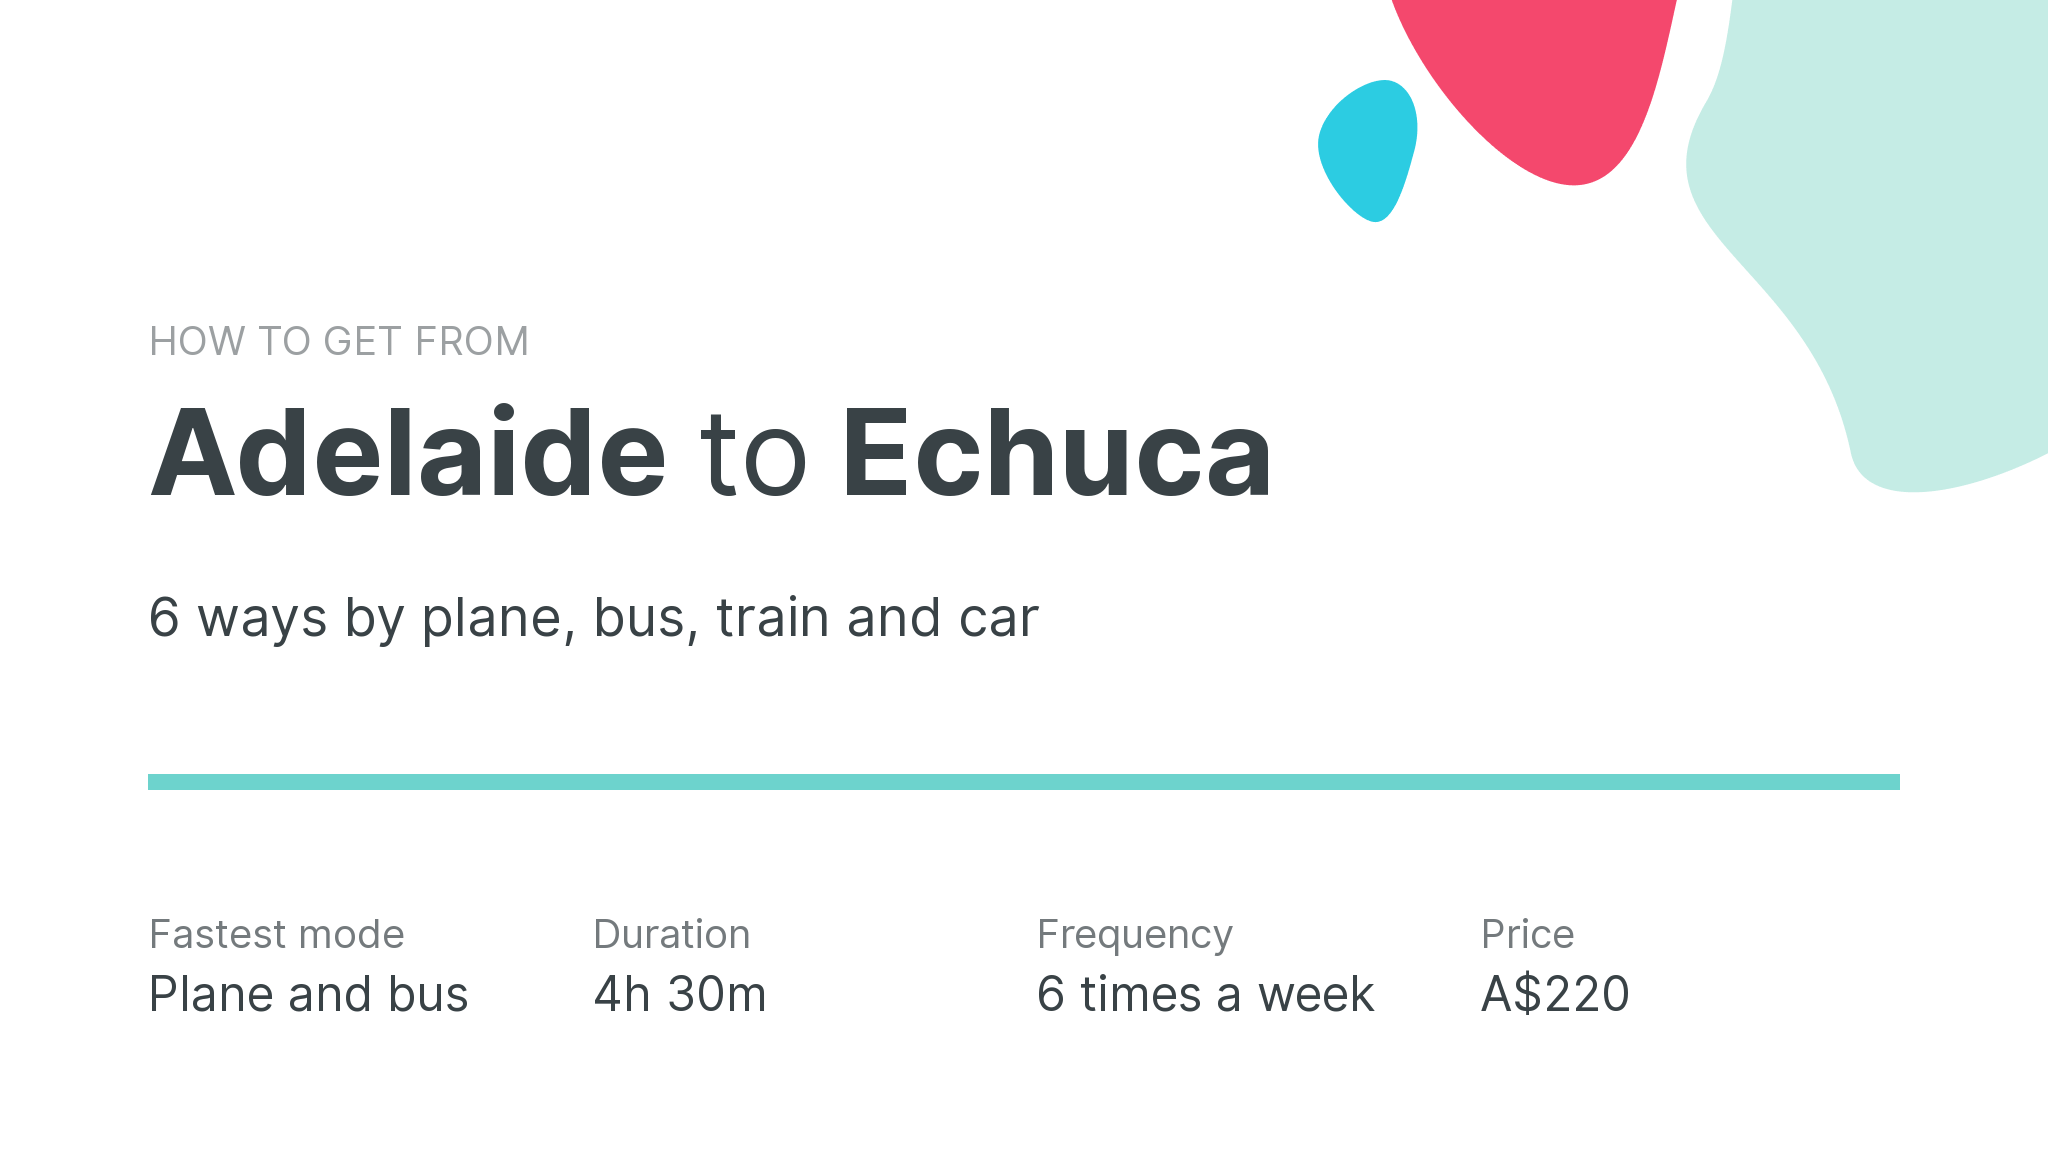 How do I get from Adelaide to Echuca